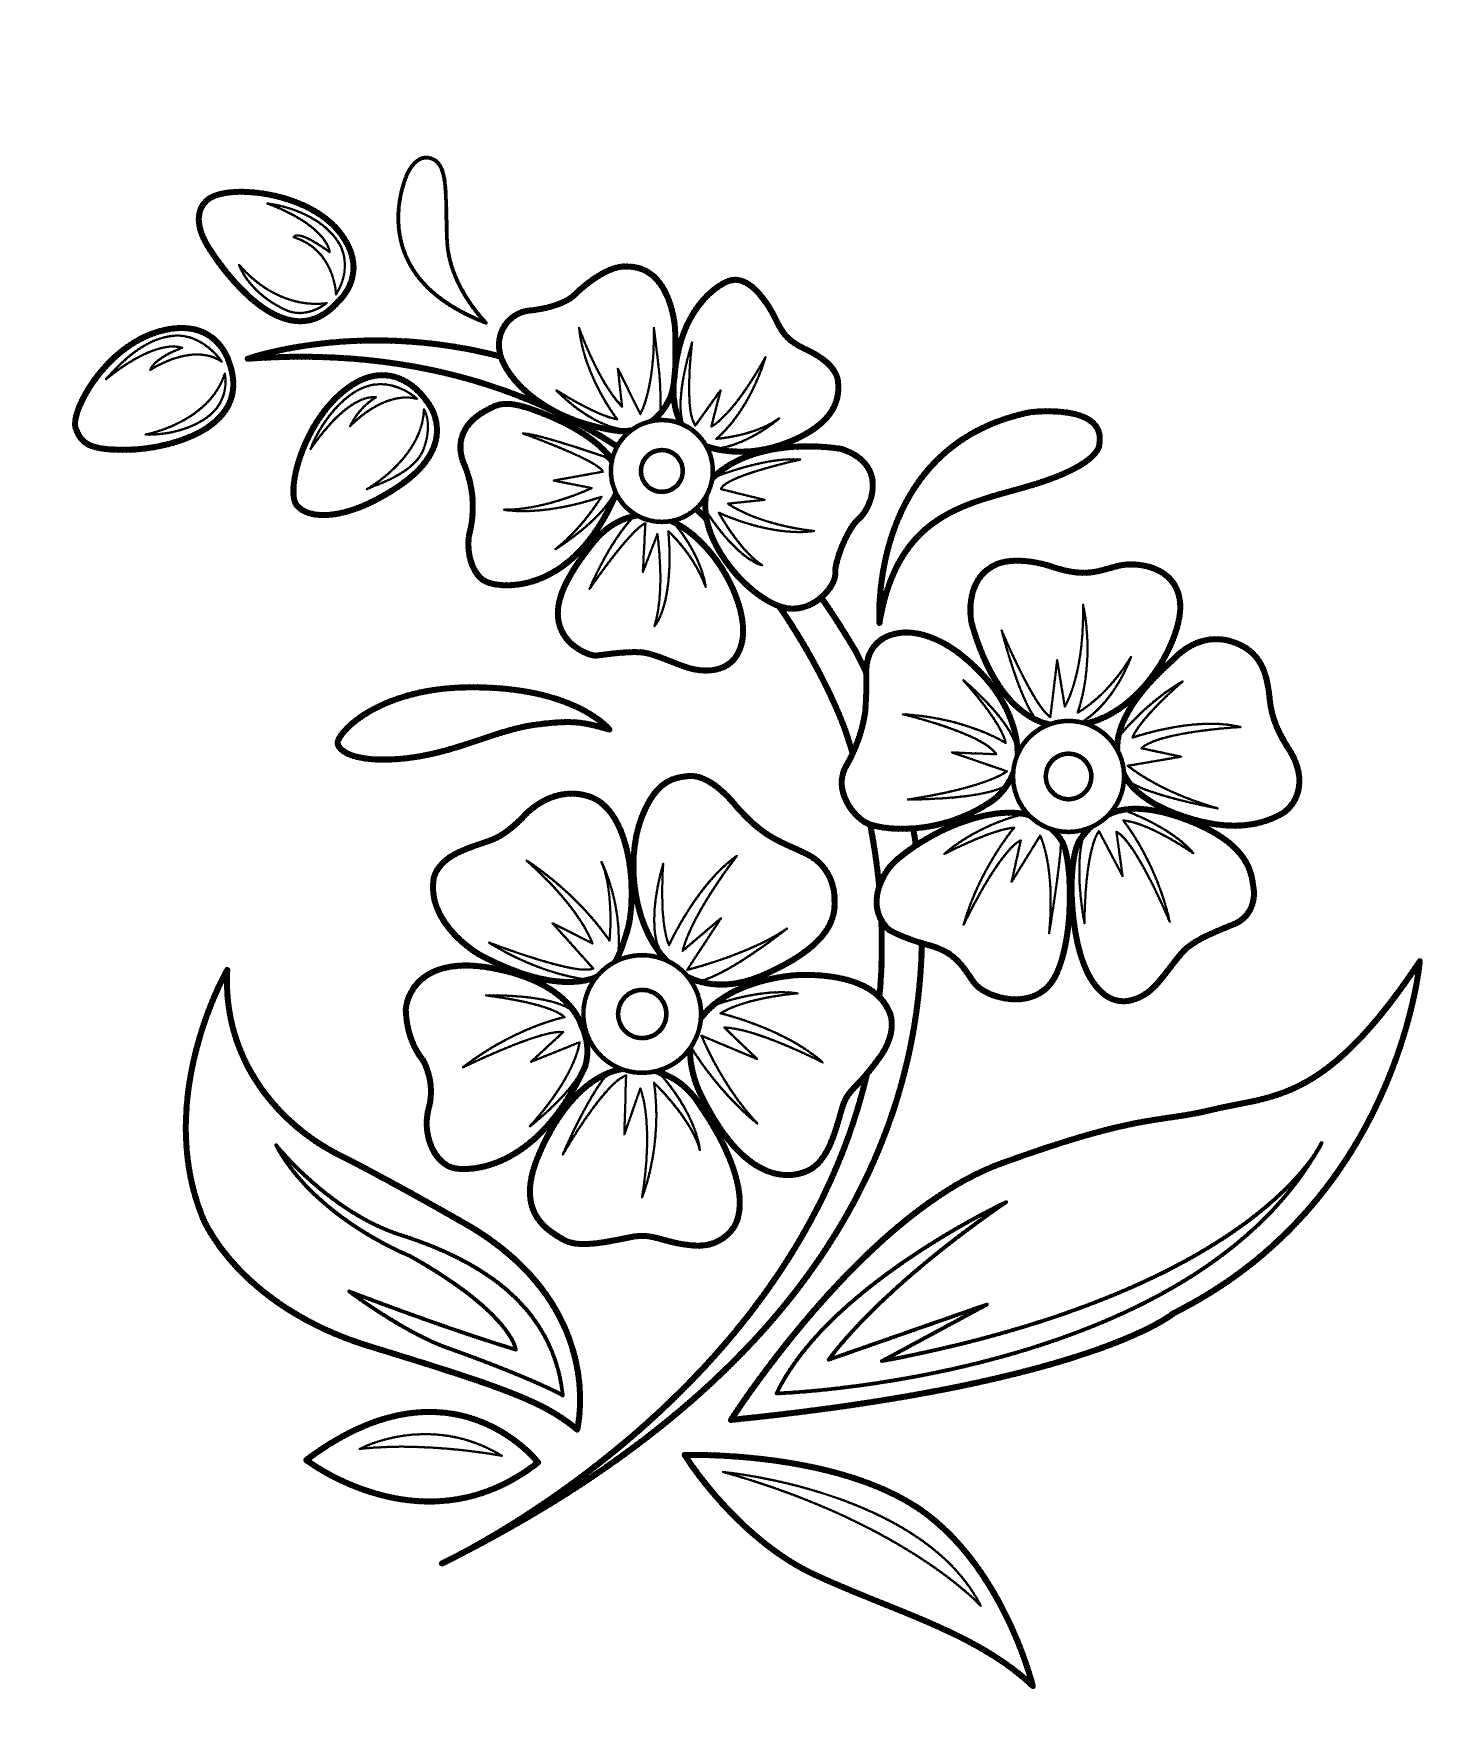 Flowers coloring pages for kids printable free coloing